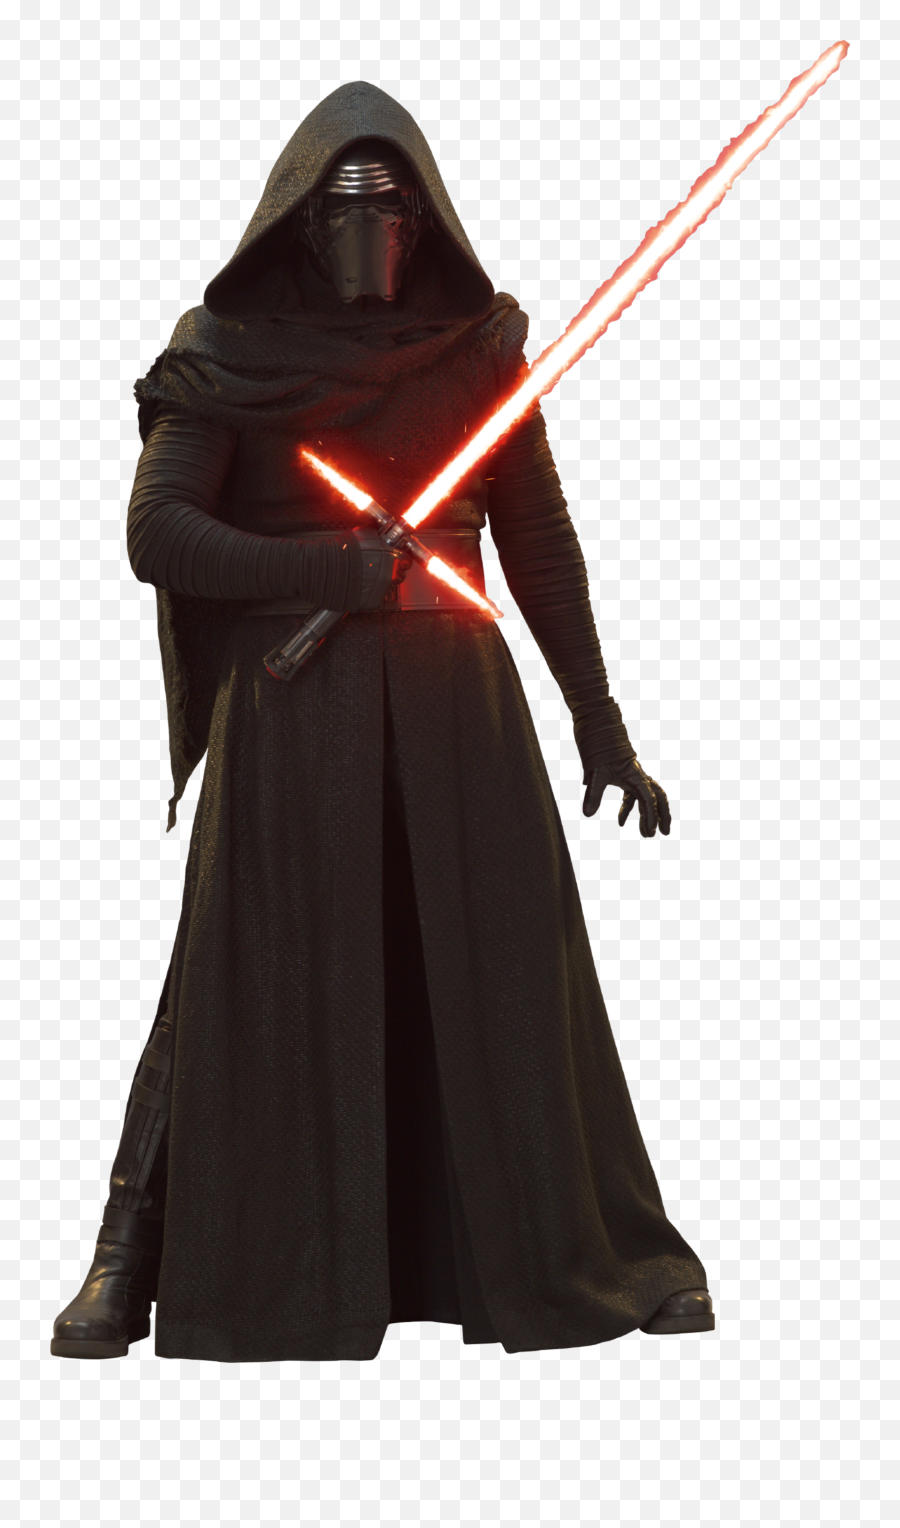 Get Star Wars Png Pictures - Star Wars Characters Kylo Ren,Star Wars Png